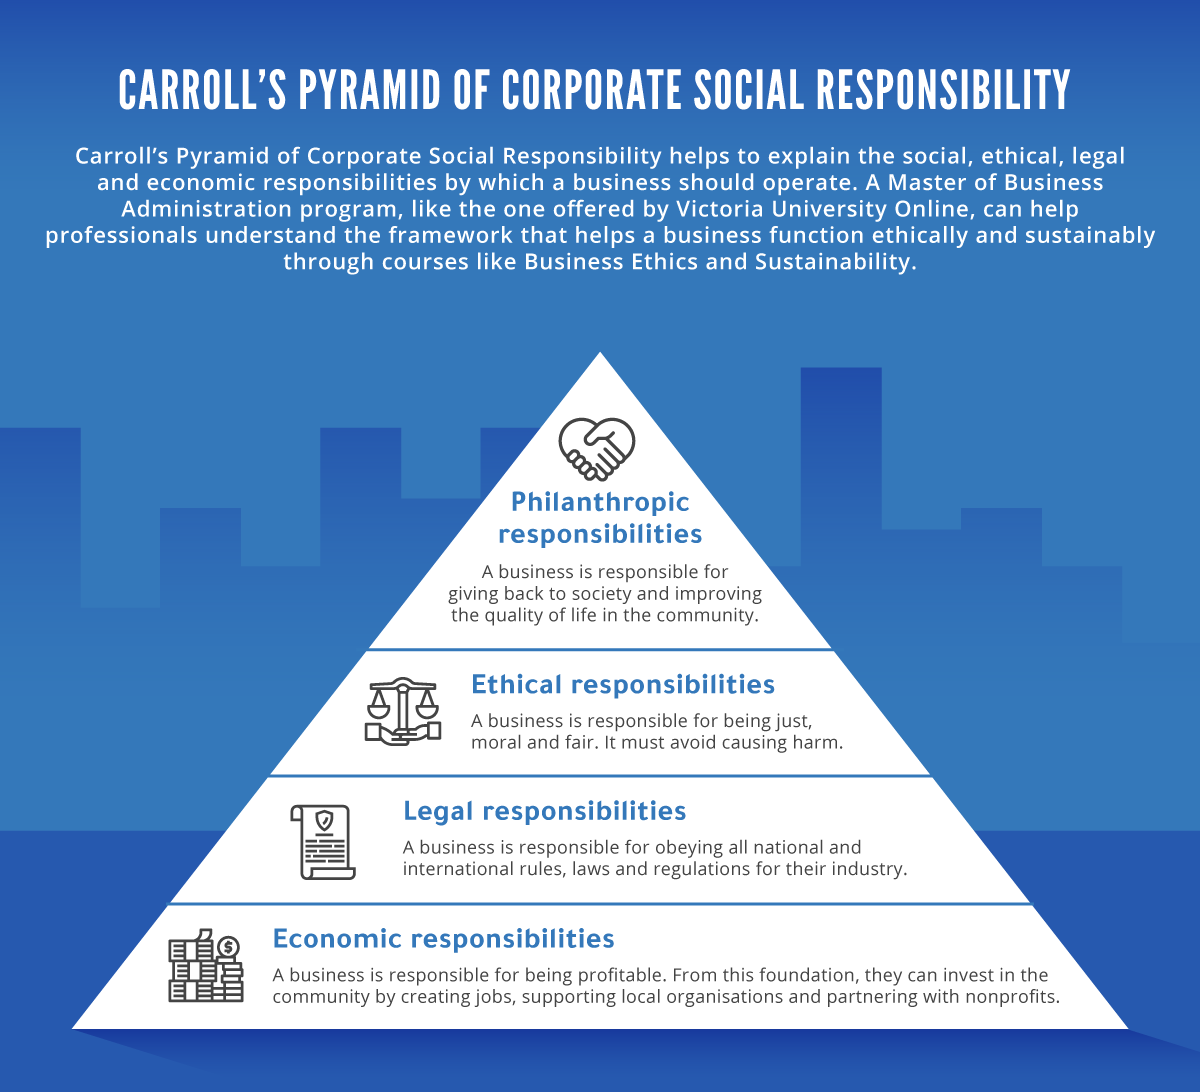 Carroll’s Pyramid of Social Responsibility, from top to bottom.